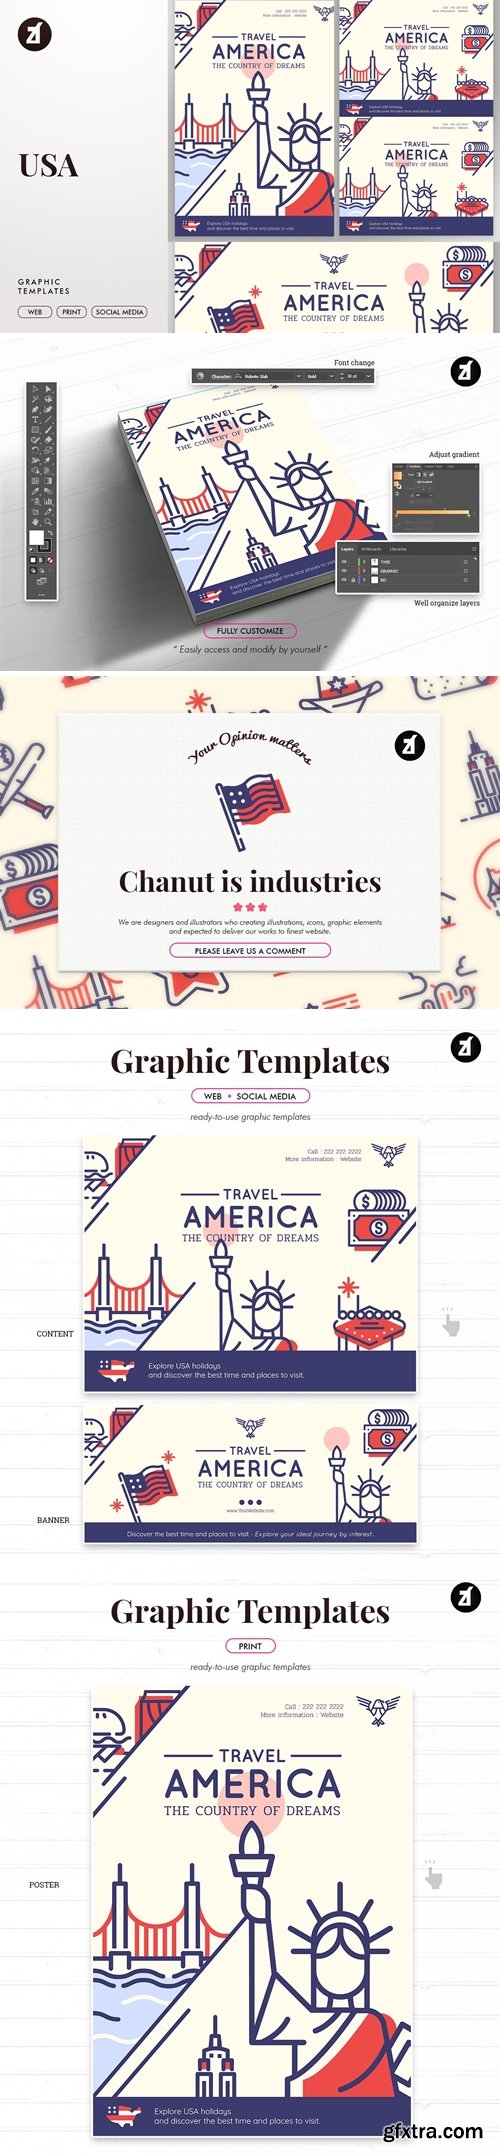 United states of America graphic templates